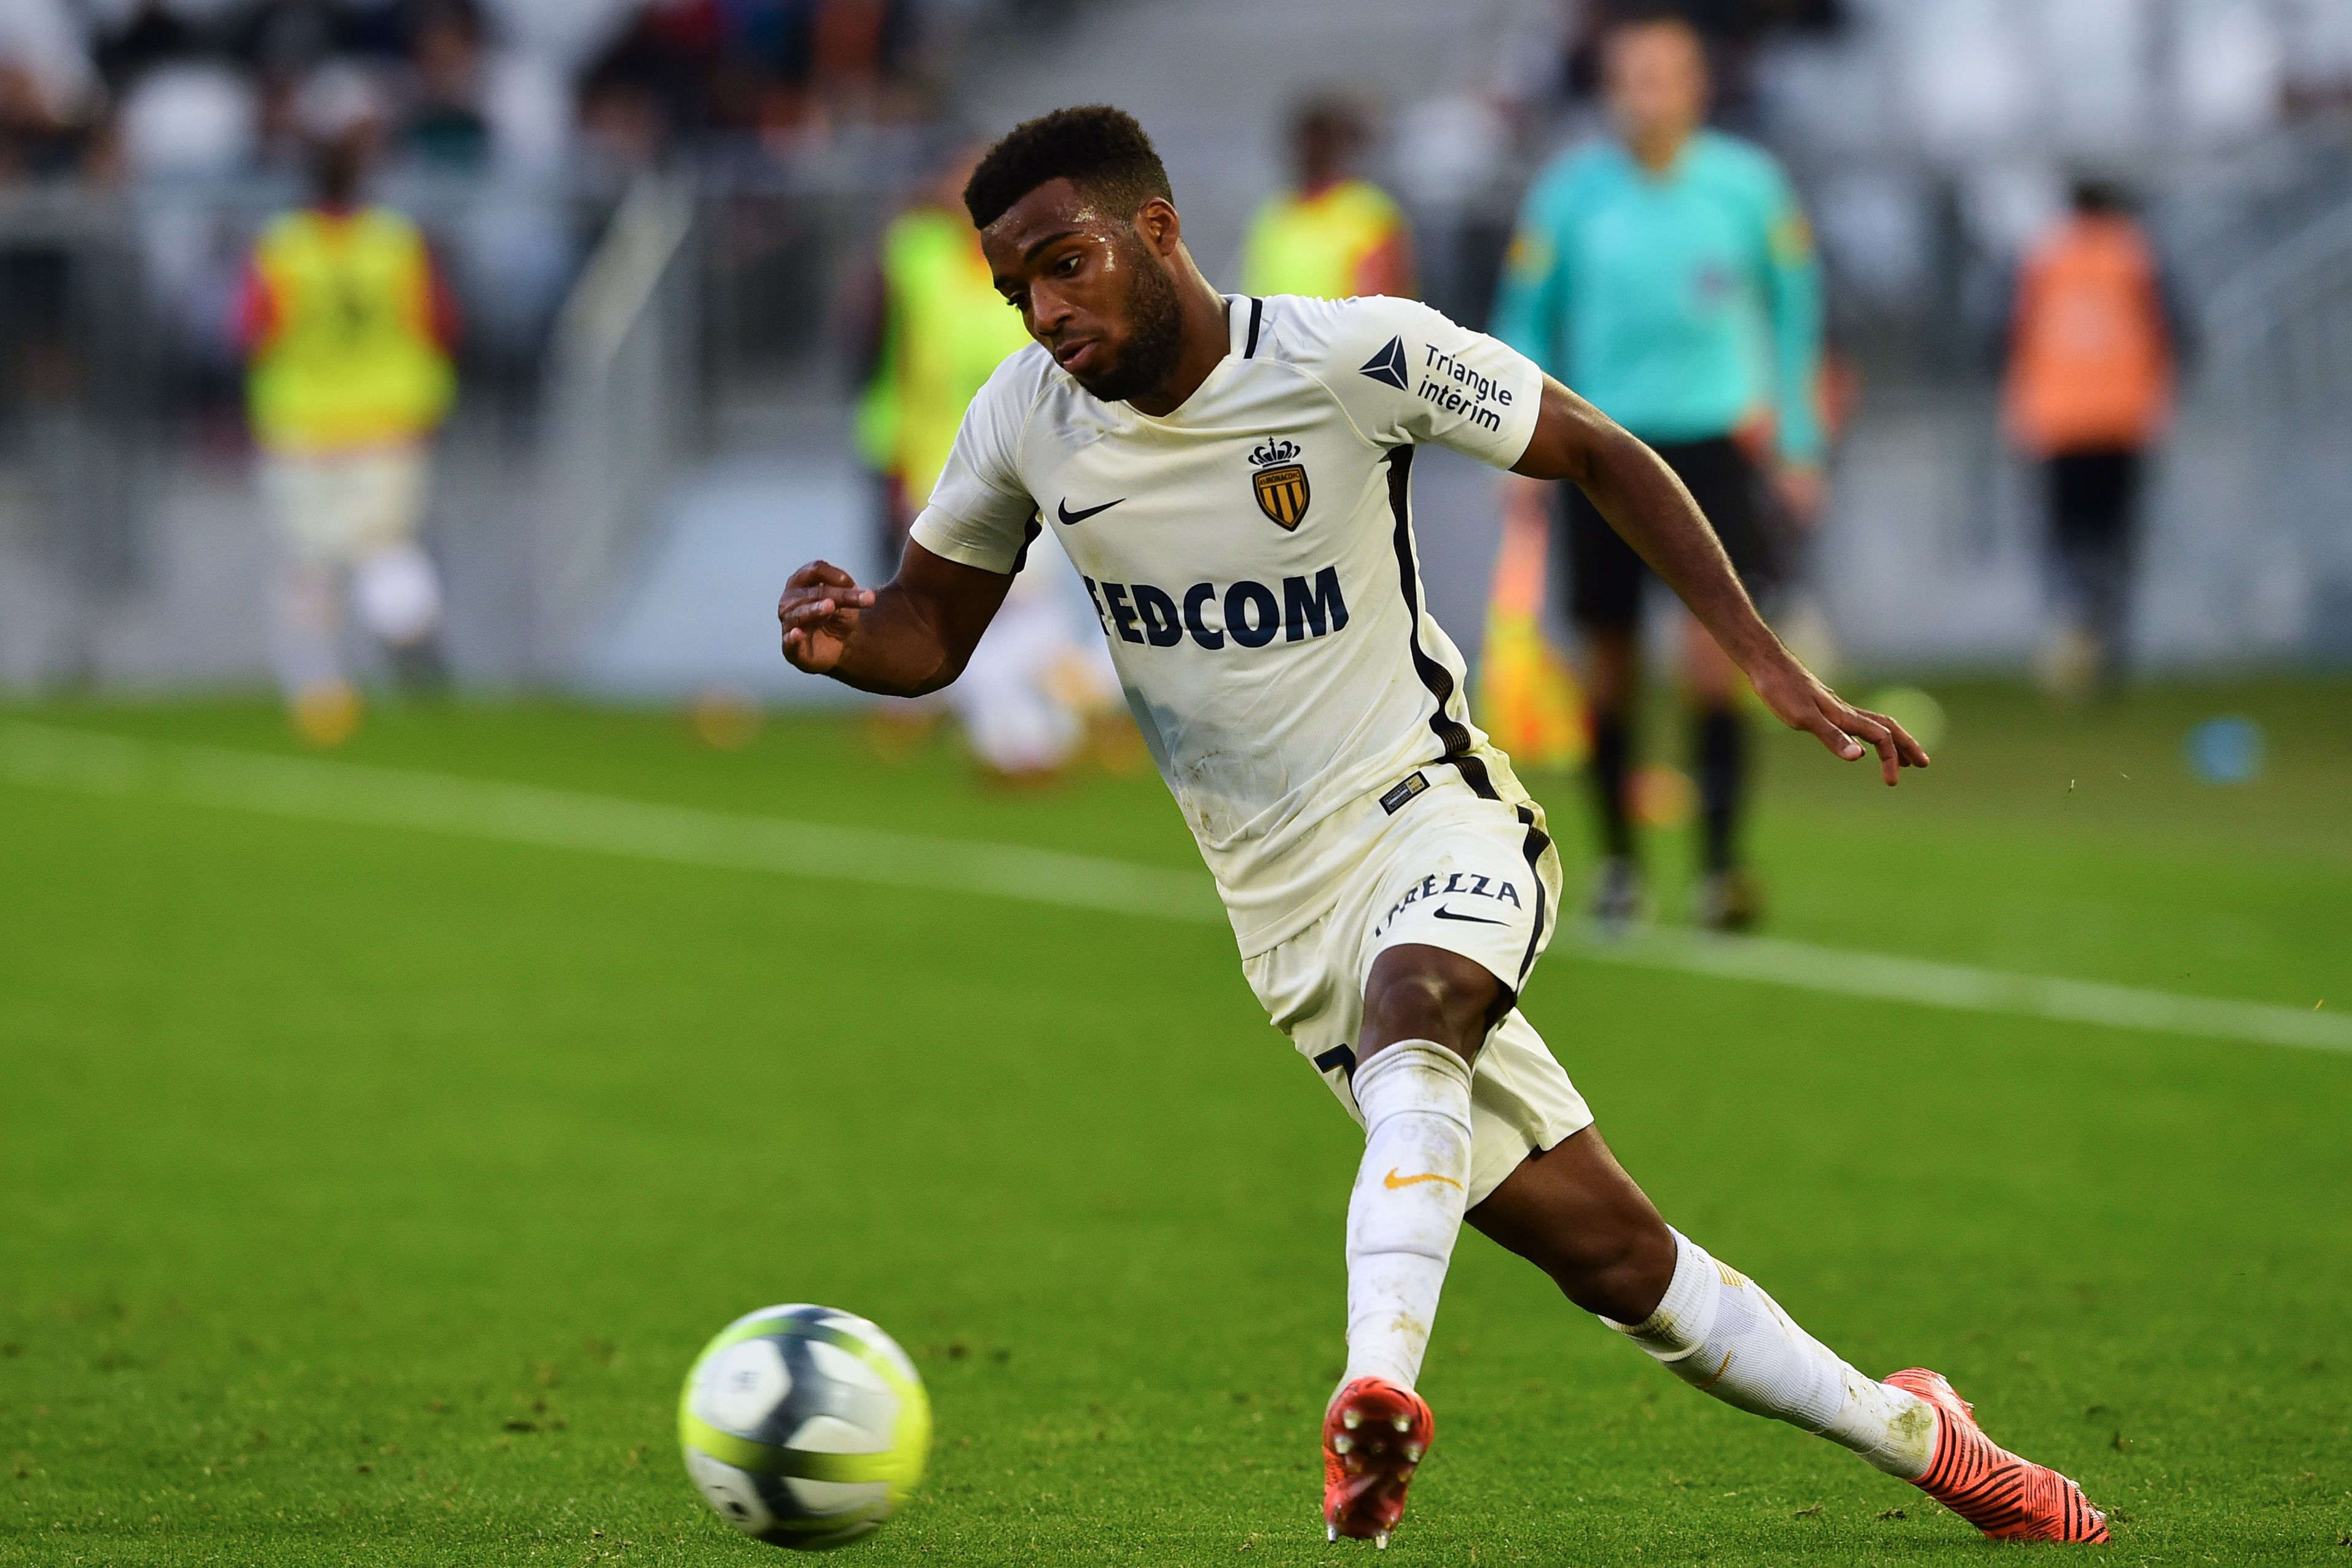 Monaco's French midfielder Thomas Lemar runs with the ball during the French L1 football match between Bordeaux and Monaco on October 28, 2017 at the Matmut Atlantique stadium in Bordeaux, southwestern France.  / AFP PHOTO / NICOLAS TUCAT        (Photo credit should read NICOLAS TUCAT/AFP/Getty Images)